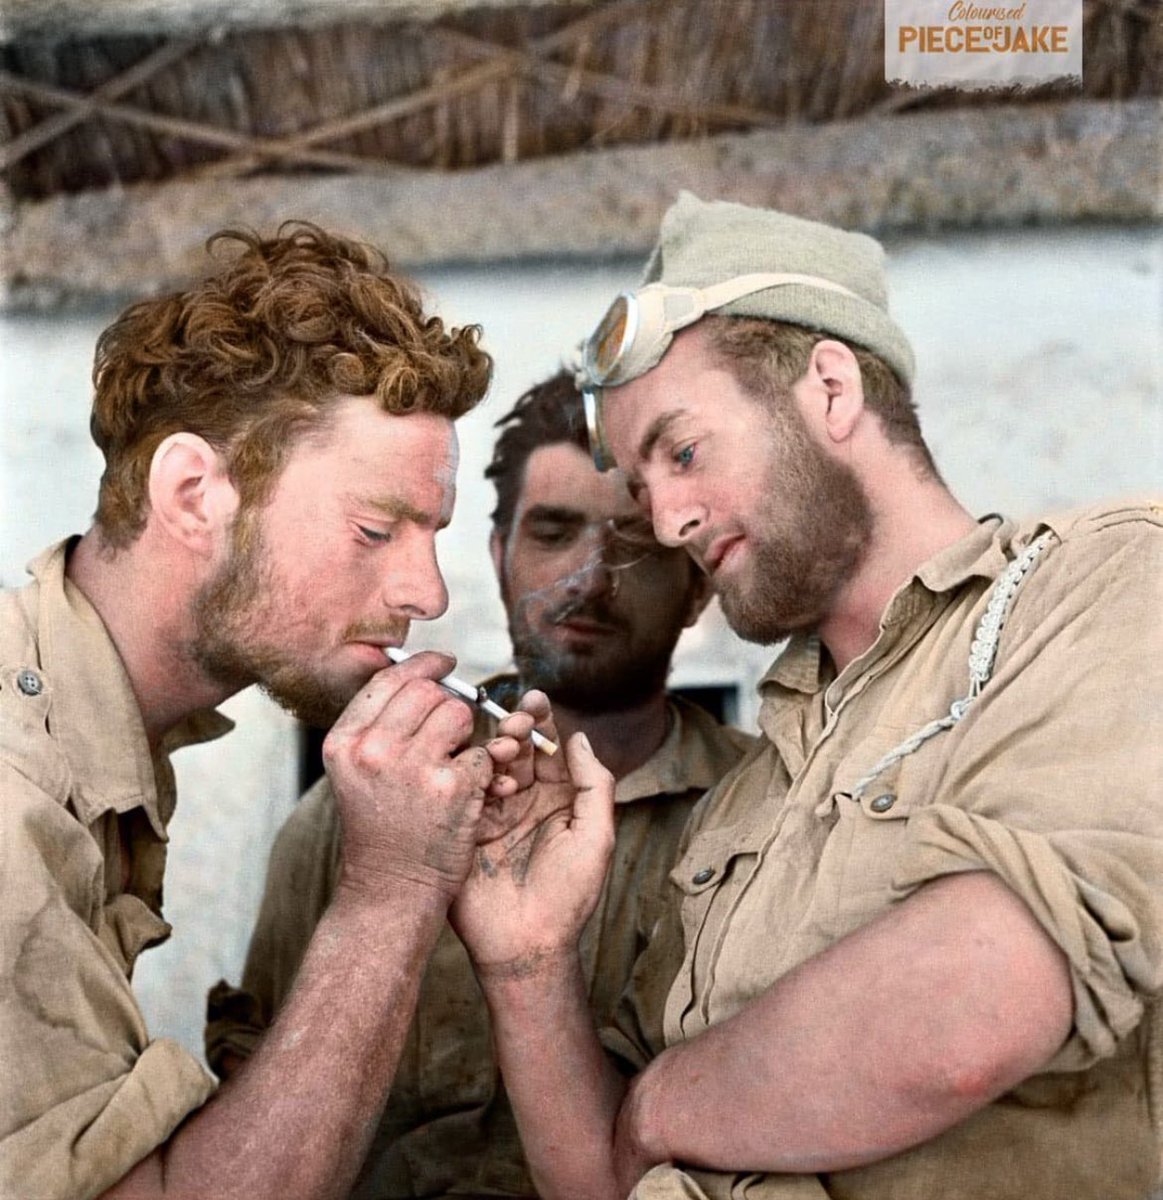 Members of Y-Patrol of the Long-Range Desert Group, British Army, take a smoke break after returning to headquarters following a reconnaissance mission during the North African Campaign. Photograph taken at Siwa Oasis, Western Desert, Egypt, in 1942.